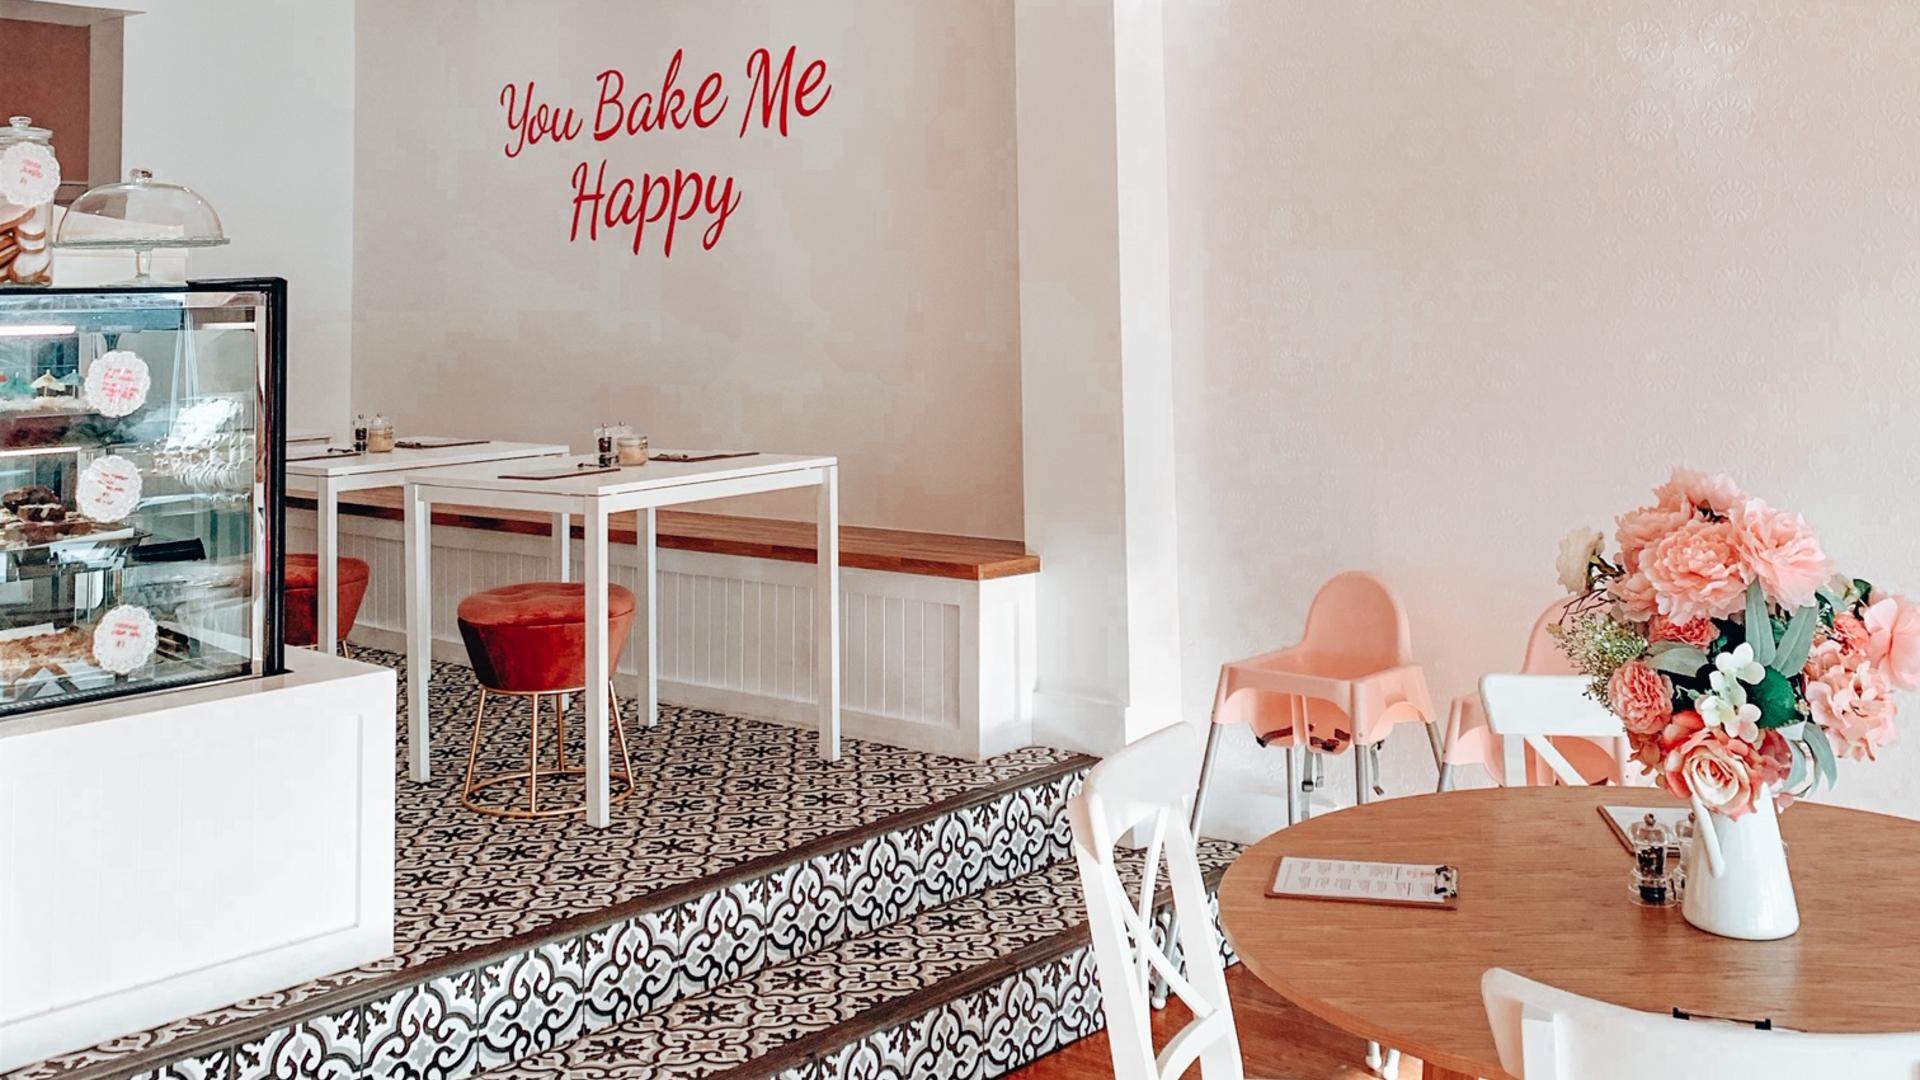 The Sunday Baker Is the New Pastel-Hued Bakery Cafe Taking Over Daisy's Milkbar's Old Digs